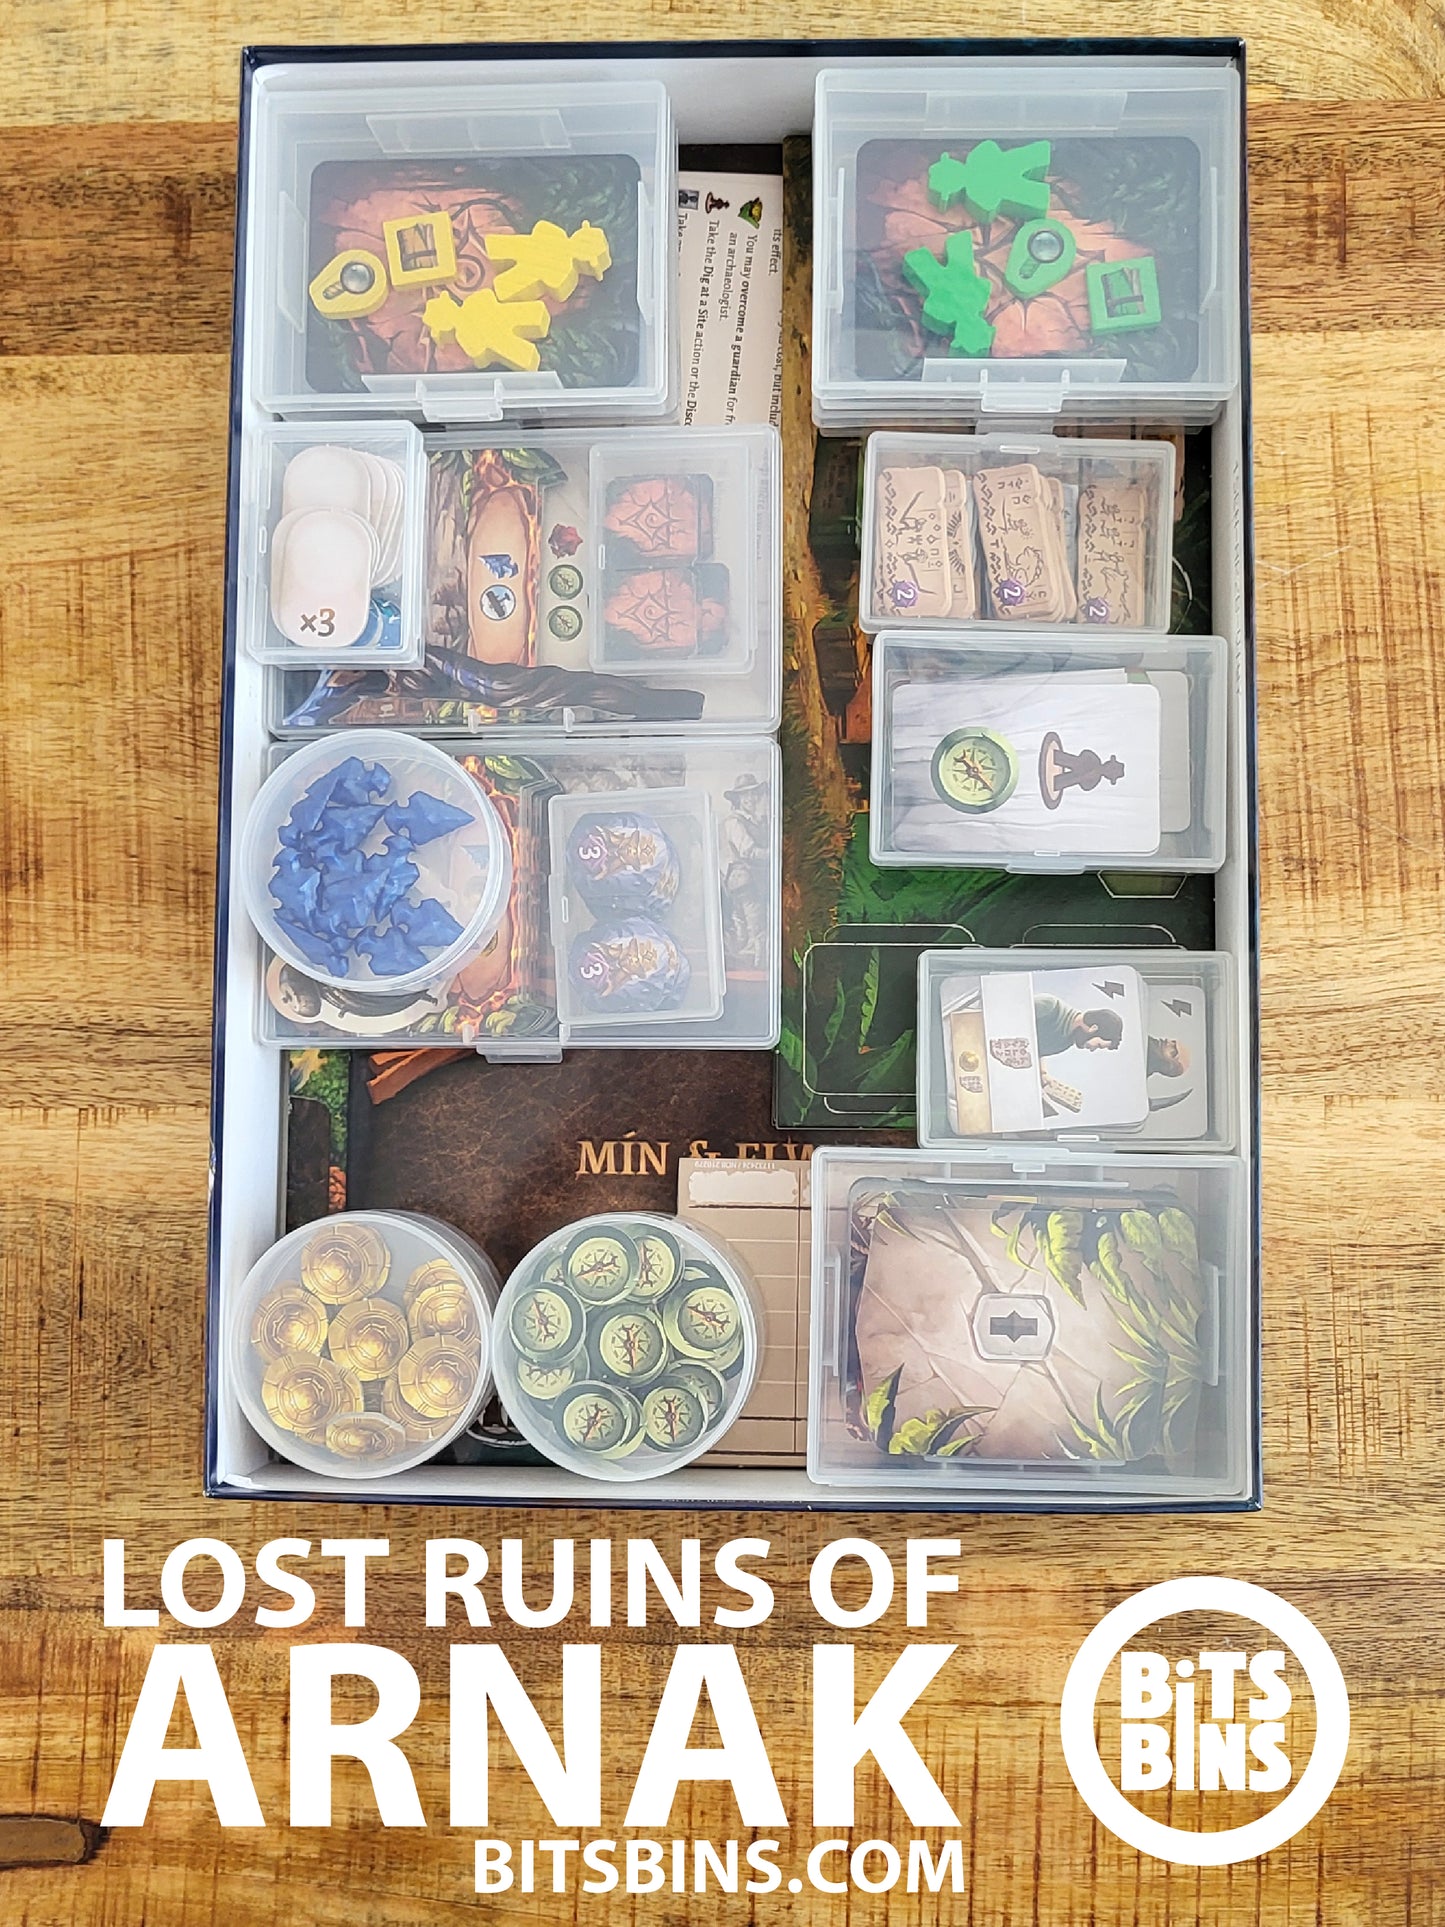 RECOMMENDED Lost Ruins of Arnak - 5 Pods, 3 Minis, 2 Originals, 1 XL, 4 Card Boxes, 1 100+ Card Box